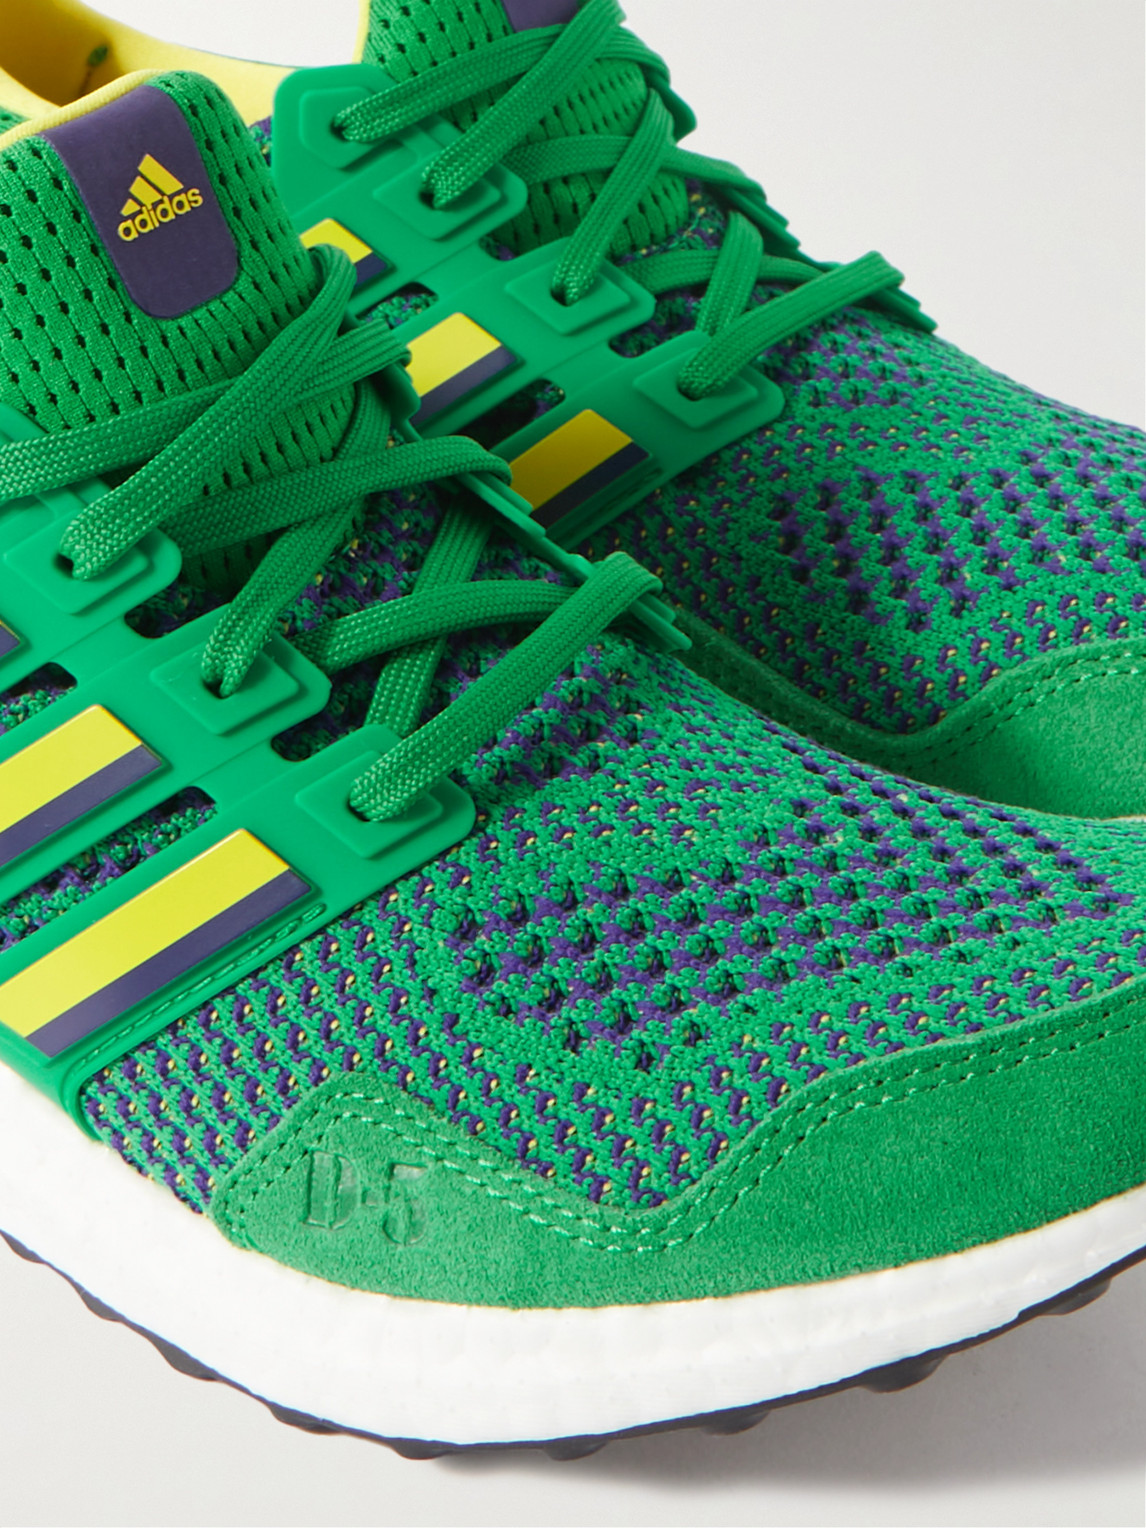 ADIDAS ORIGINALS THE MIGHTY DUCKS ULTRABOOST 1.0 RUBBER-TRIMMED PRIMEKNIT RUNNING SNEAKERS 